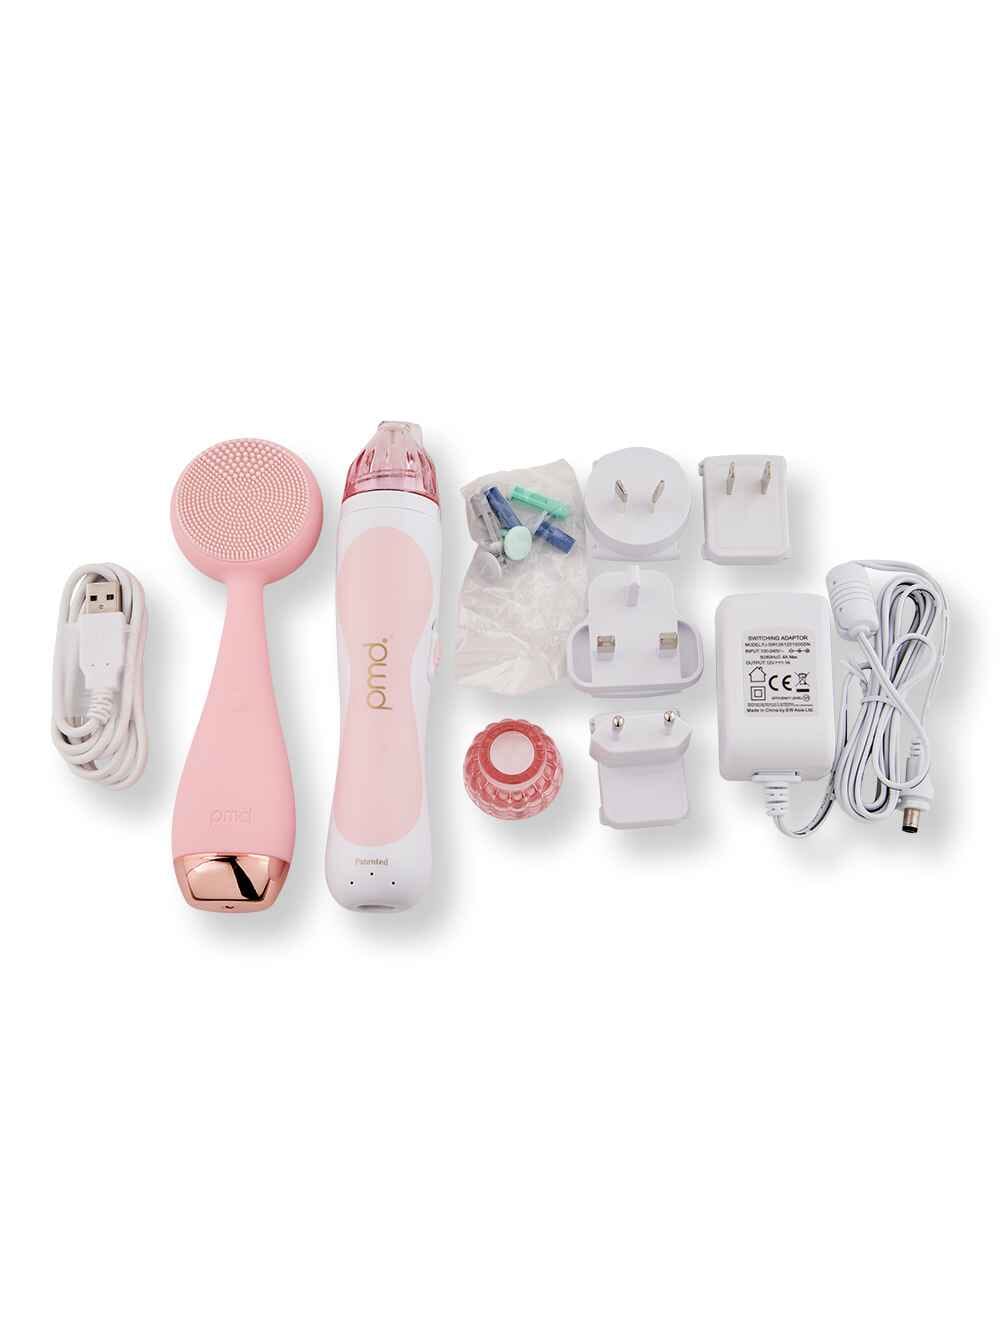 PMD PMD Personal Microderm Classic Blush & Clean Blush with Rose Quartz Skin Care Tools & Devices 